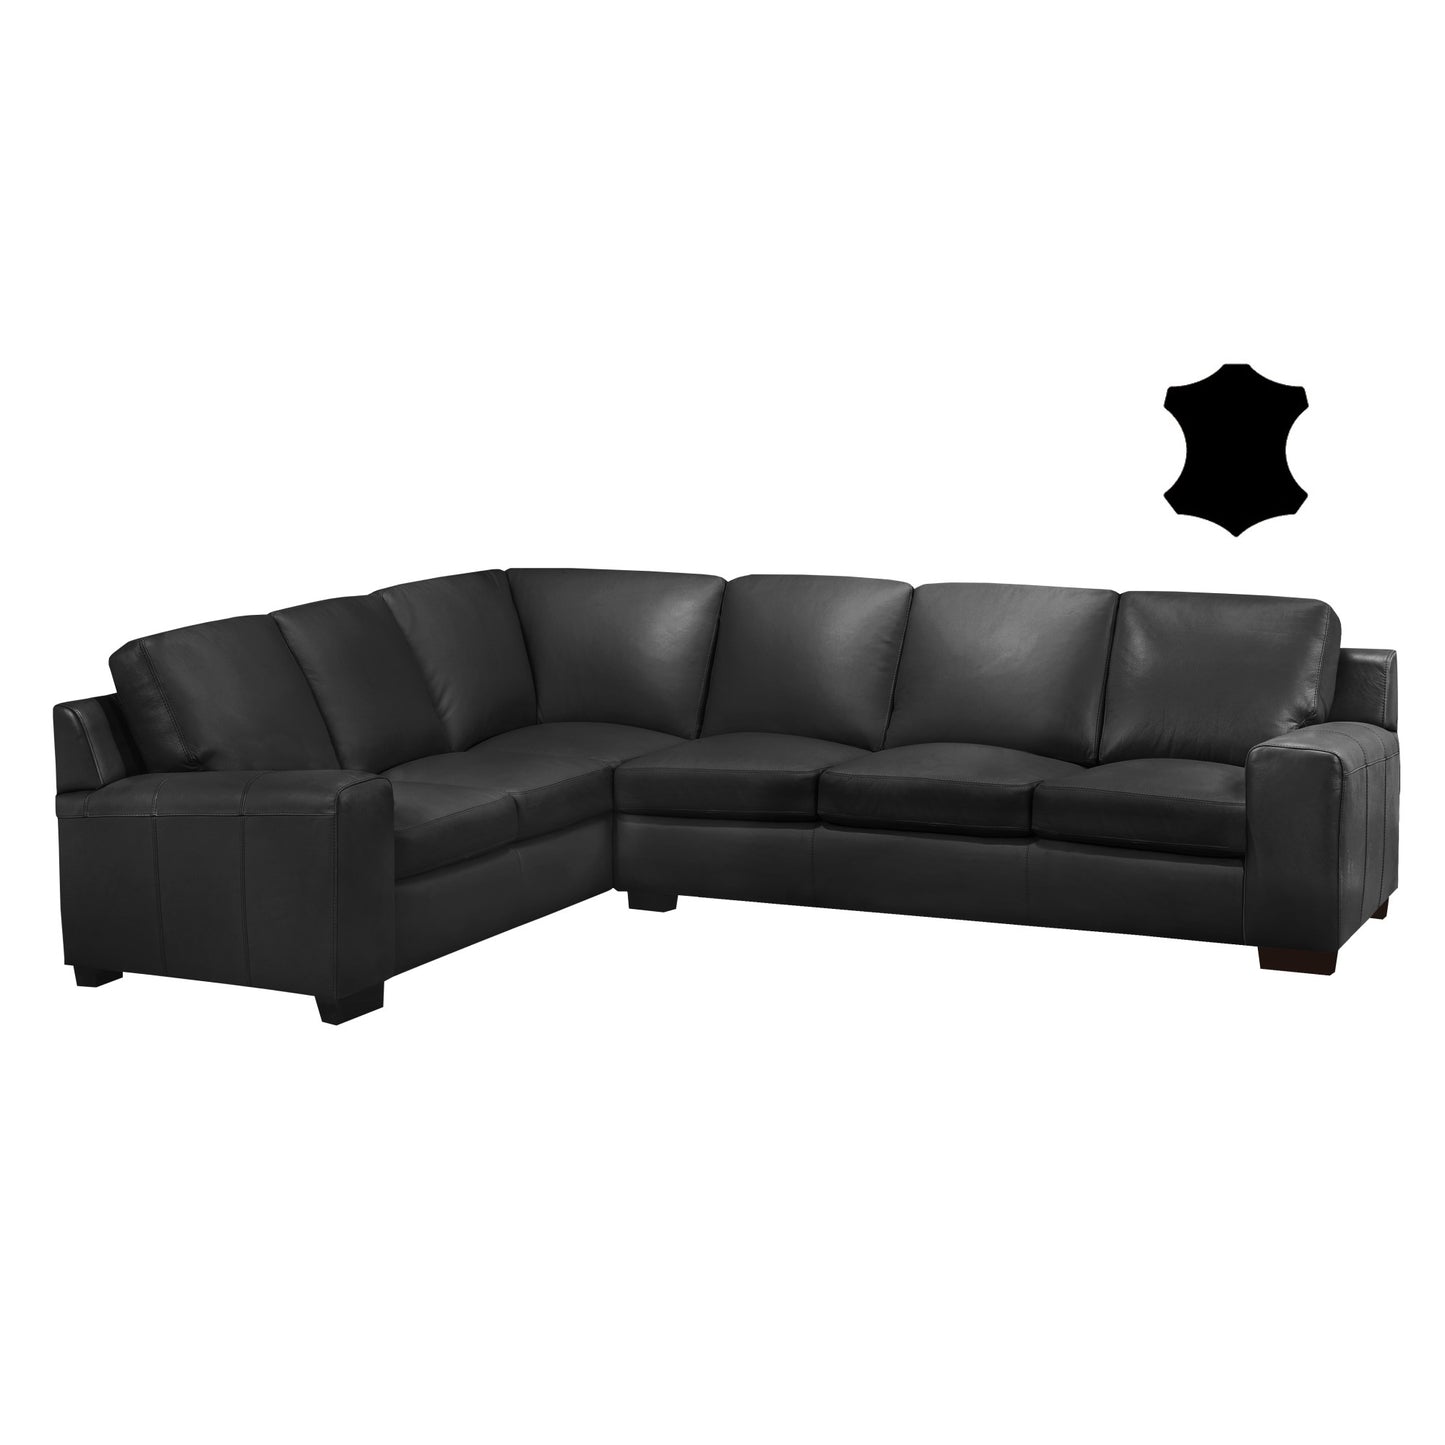 Canada Collection James Leather Sectional Sofa Series